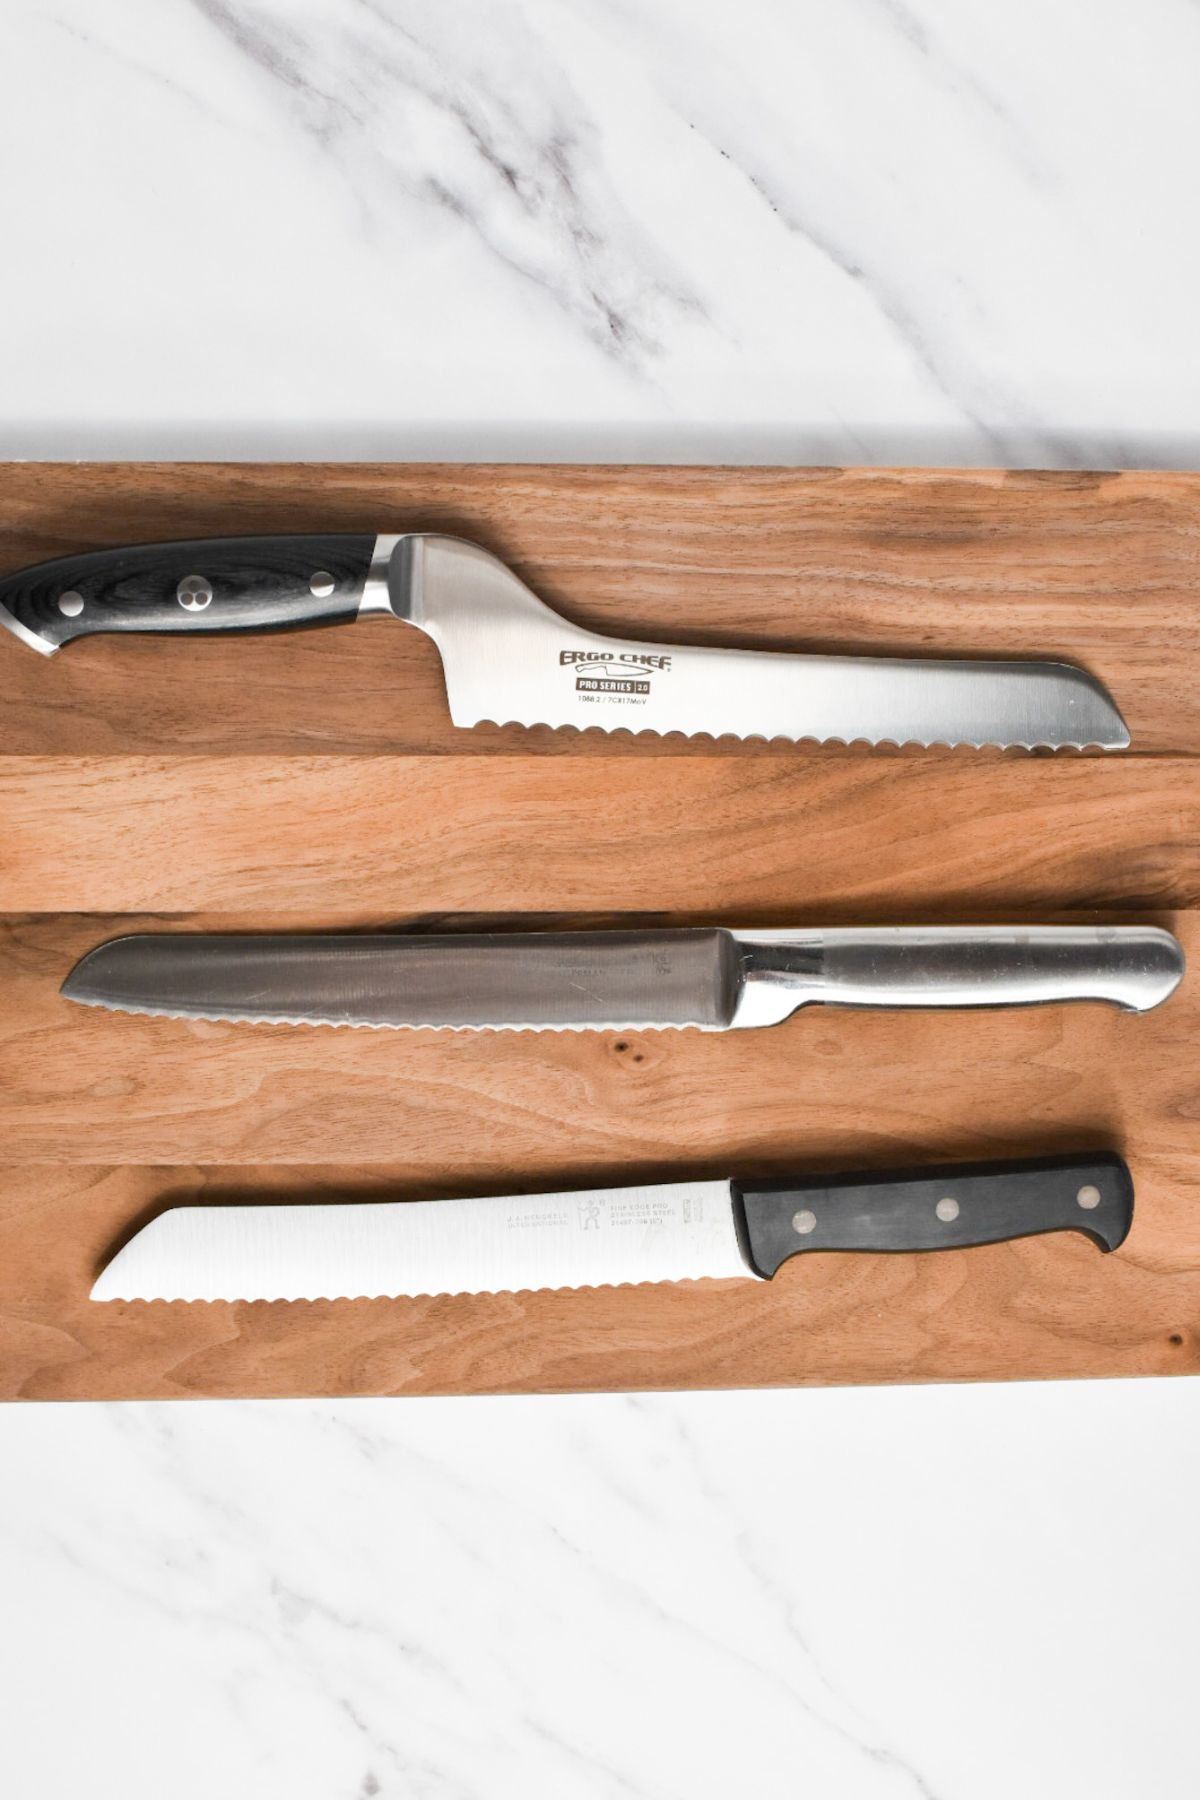 Three serrated bread knives on a wooden cutting board.